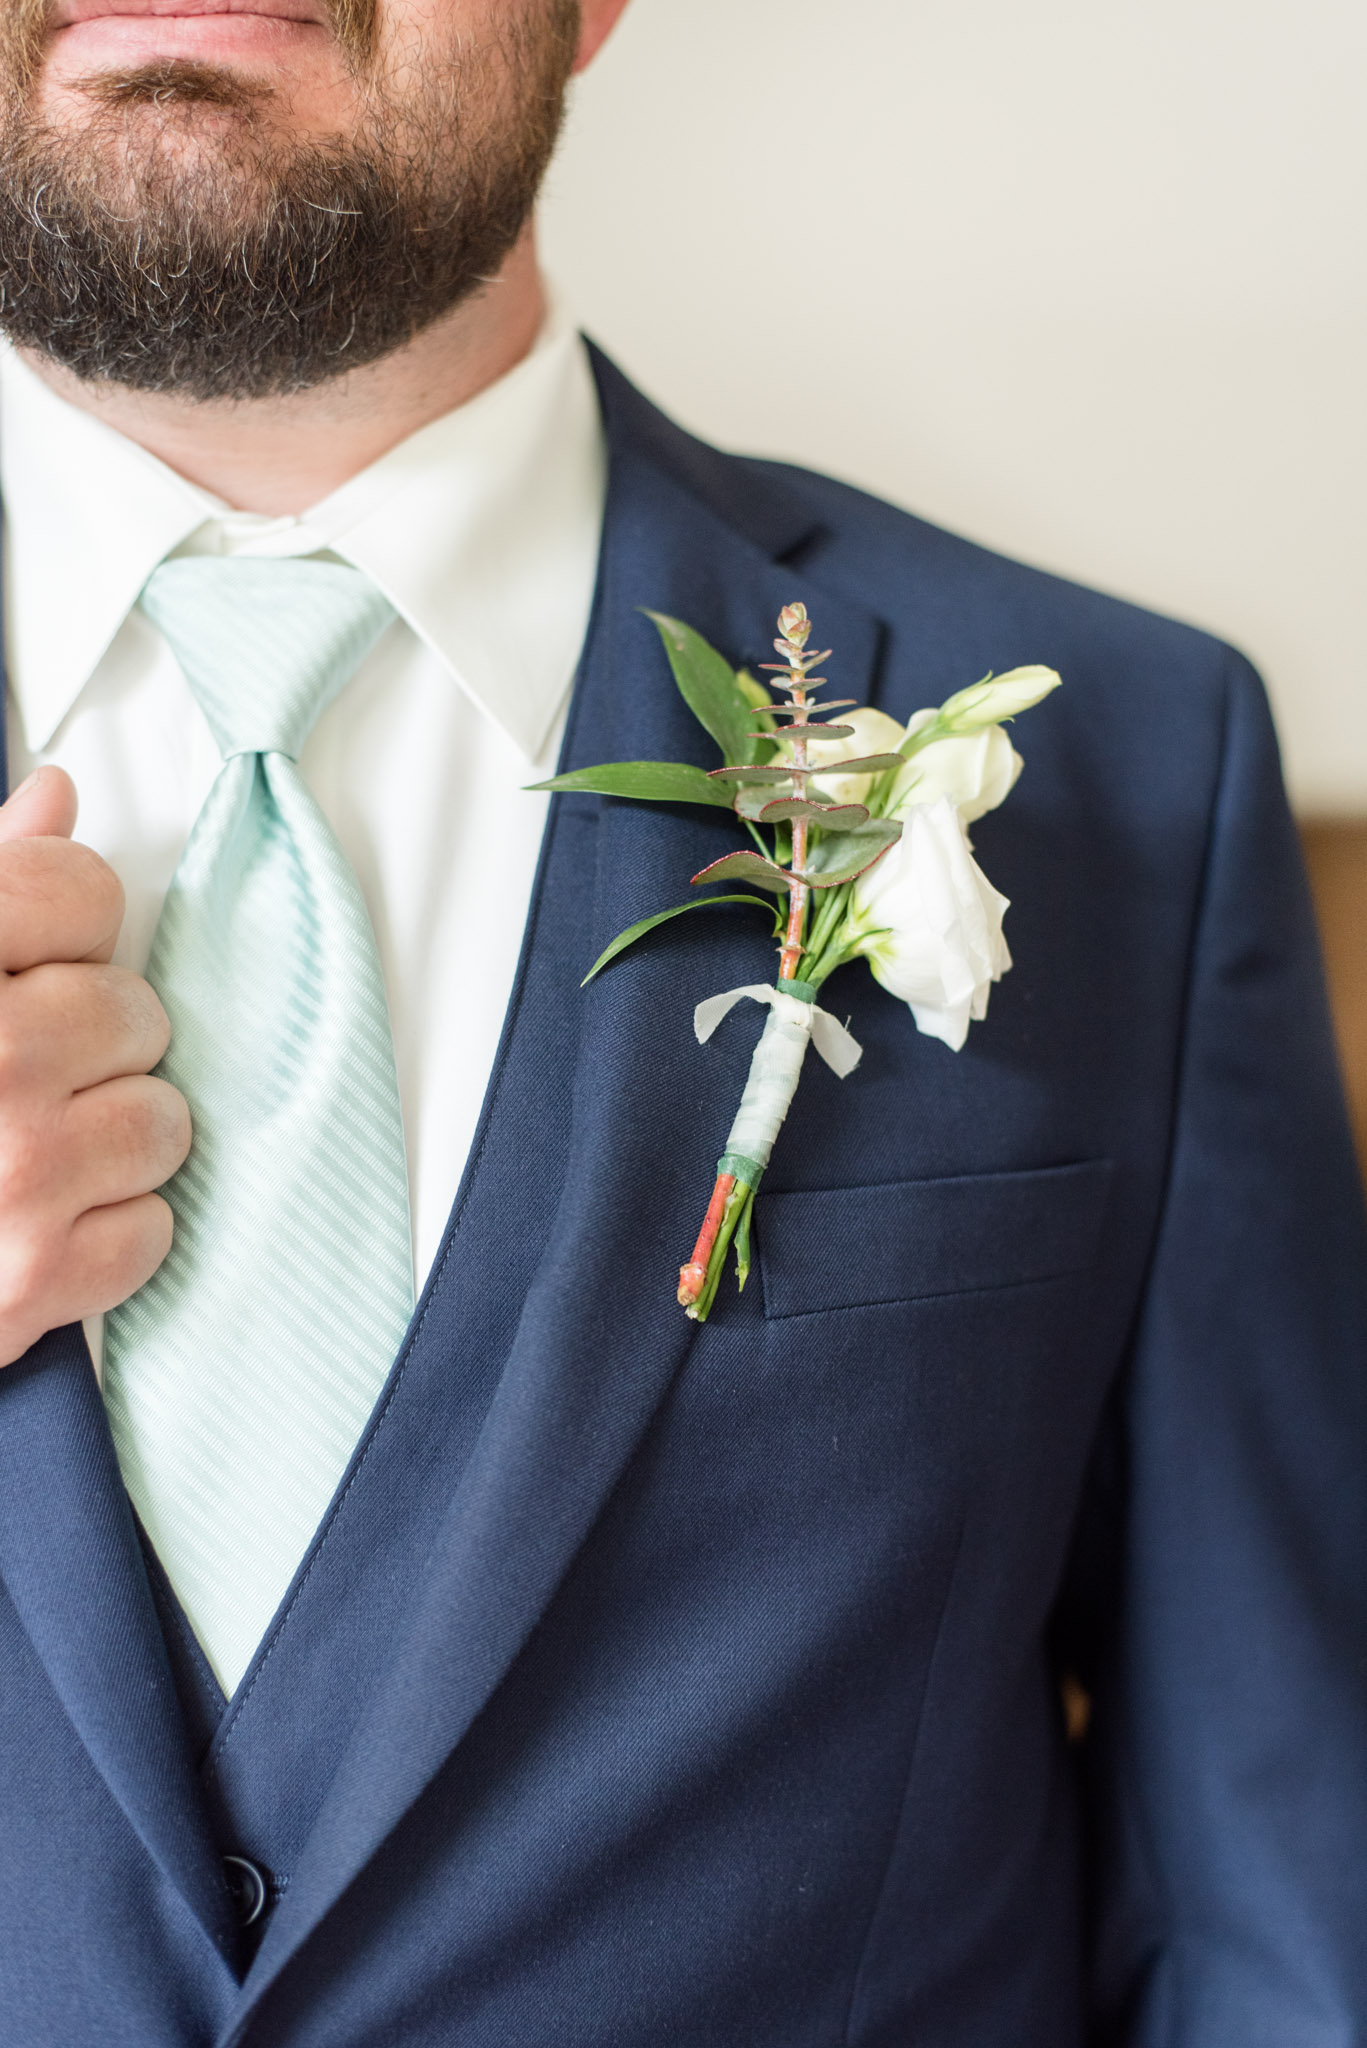 Groom's suit with boutonniere.